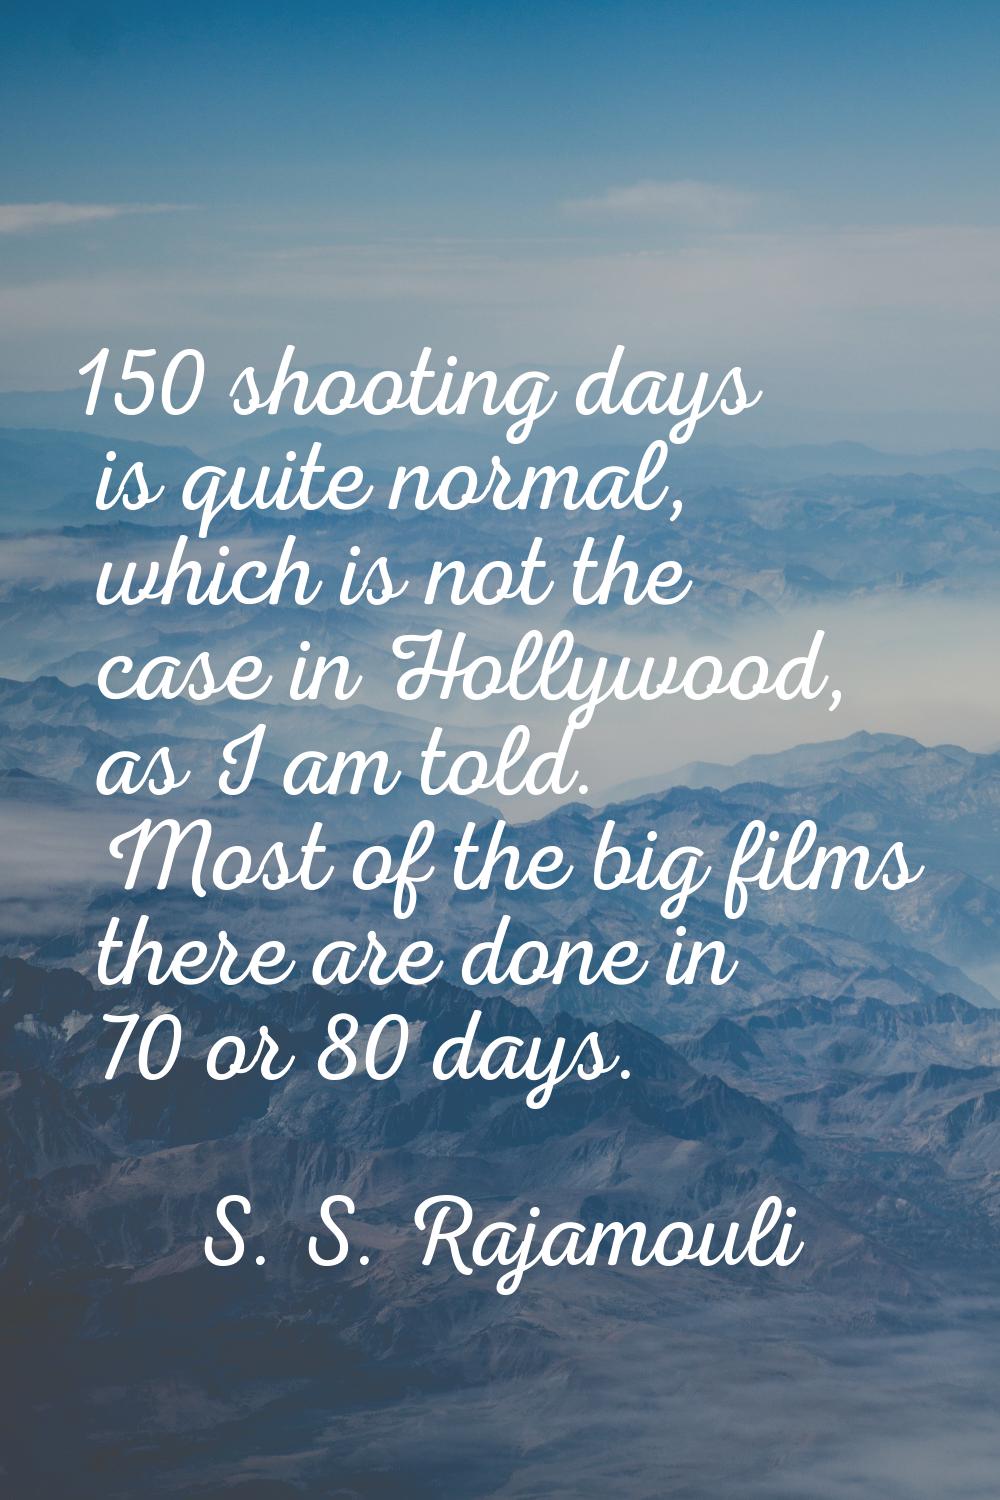 150 shooting days is quite normal, which is not the case in Hollywood, as I am told. Most of the bi